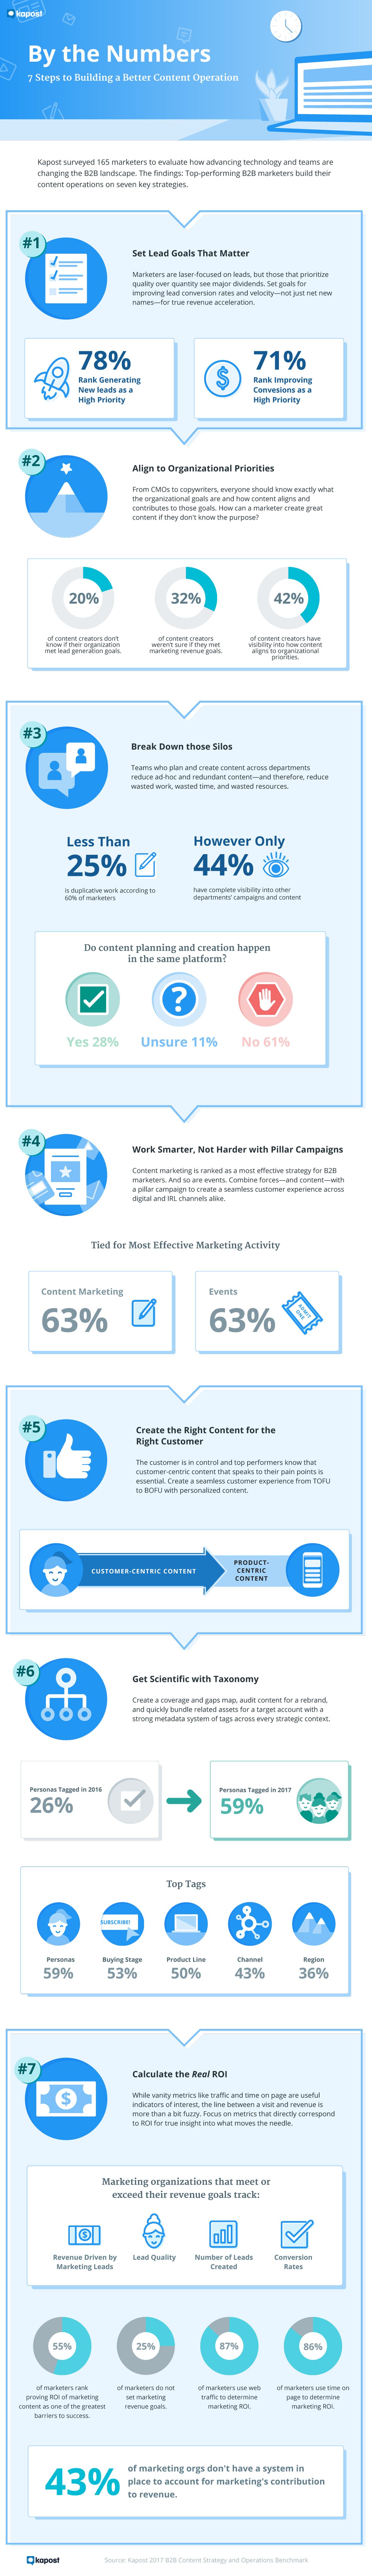 Infographic: 7 steps to building a better, more mature content operation